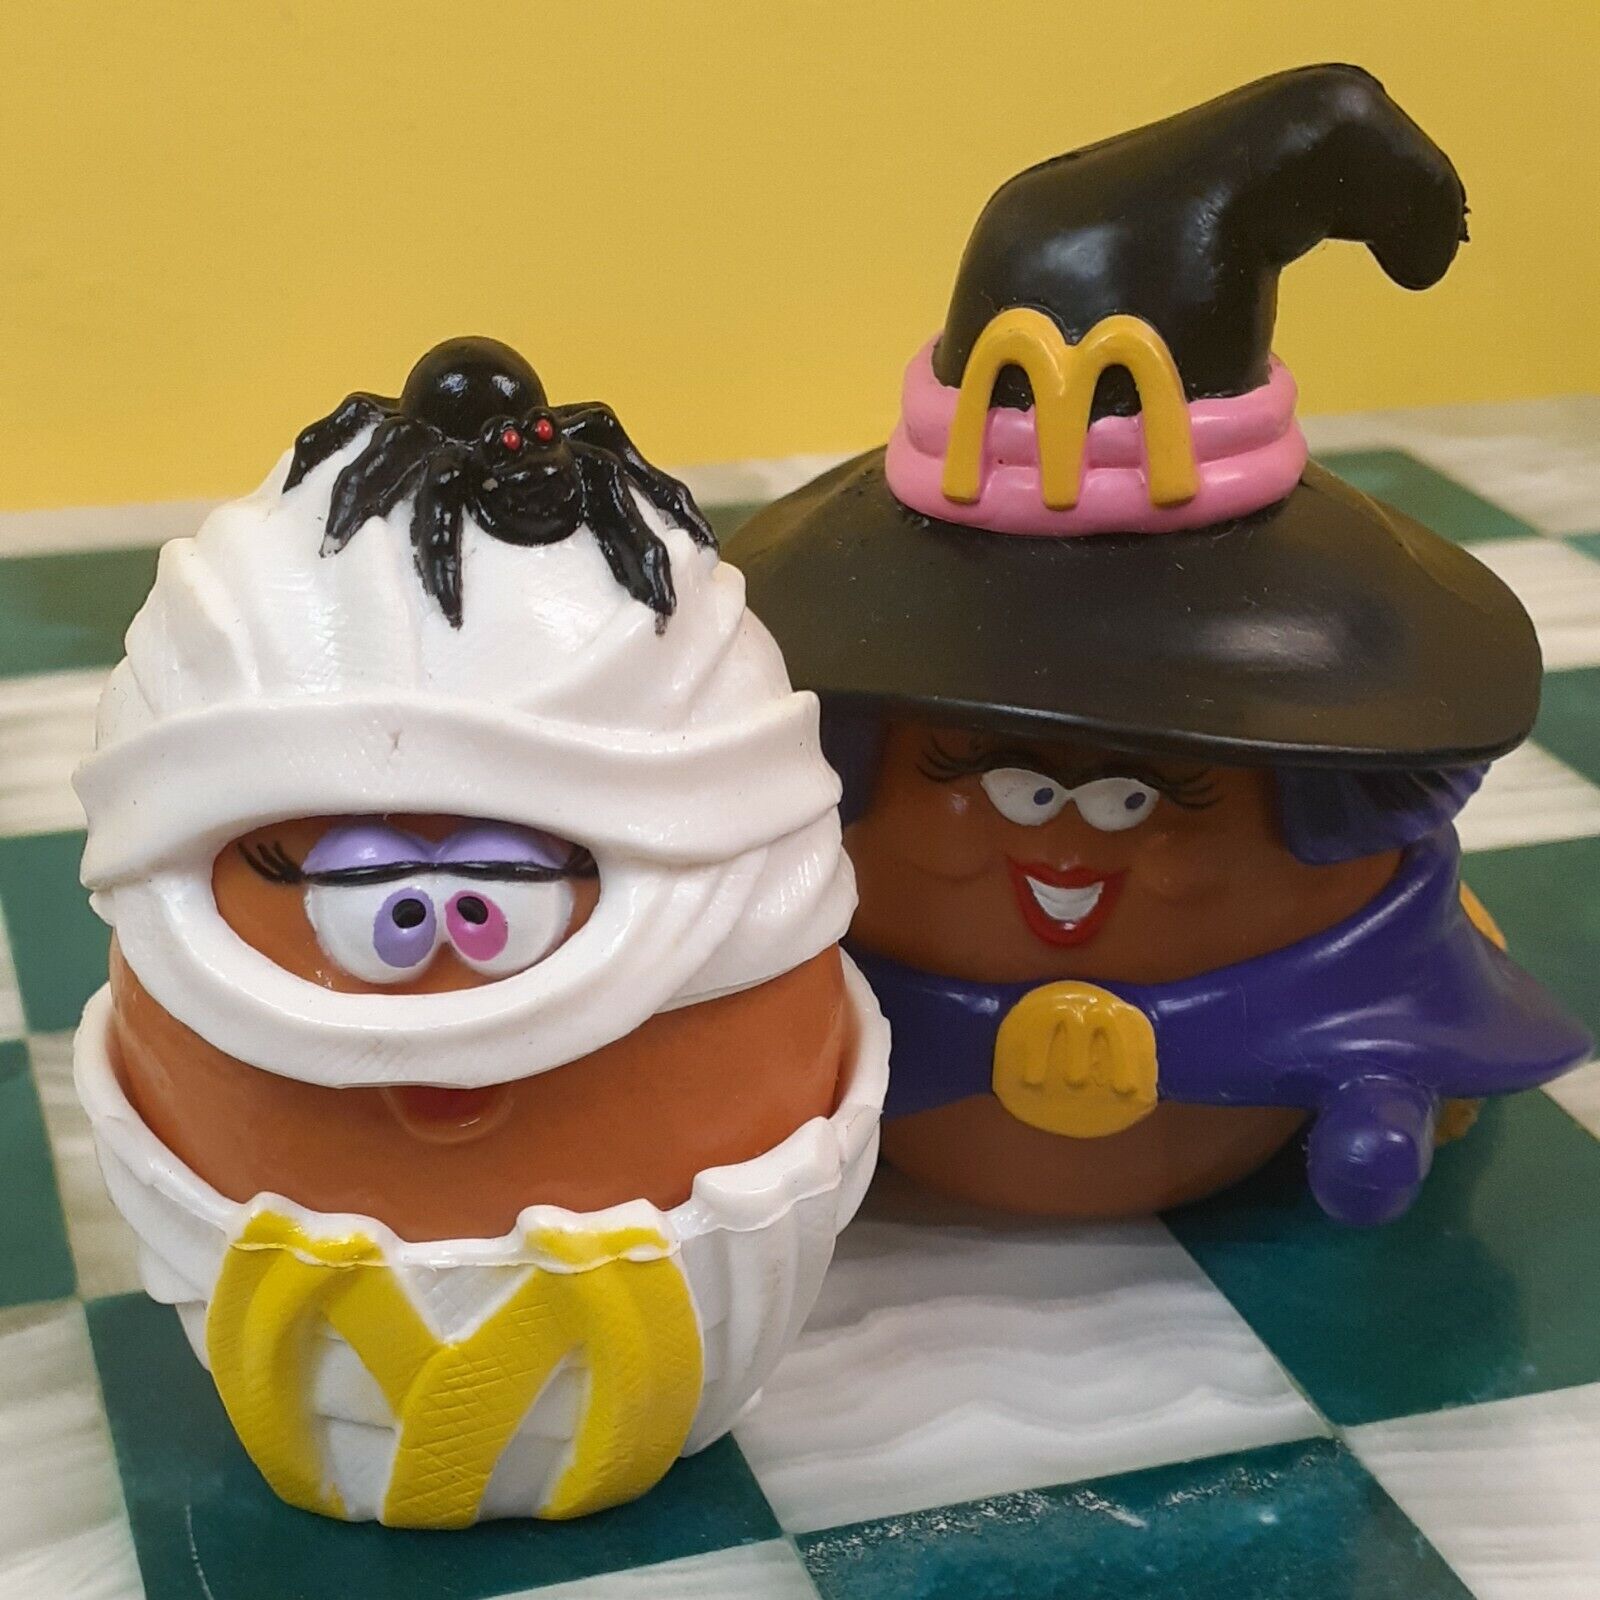 (2) McDonalds 1992 McNugget Buddies Happy Meal Toys Mummy and Witch Figurines